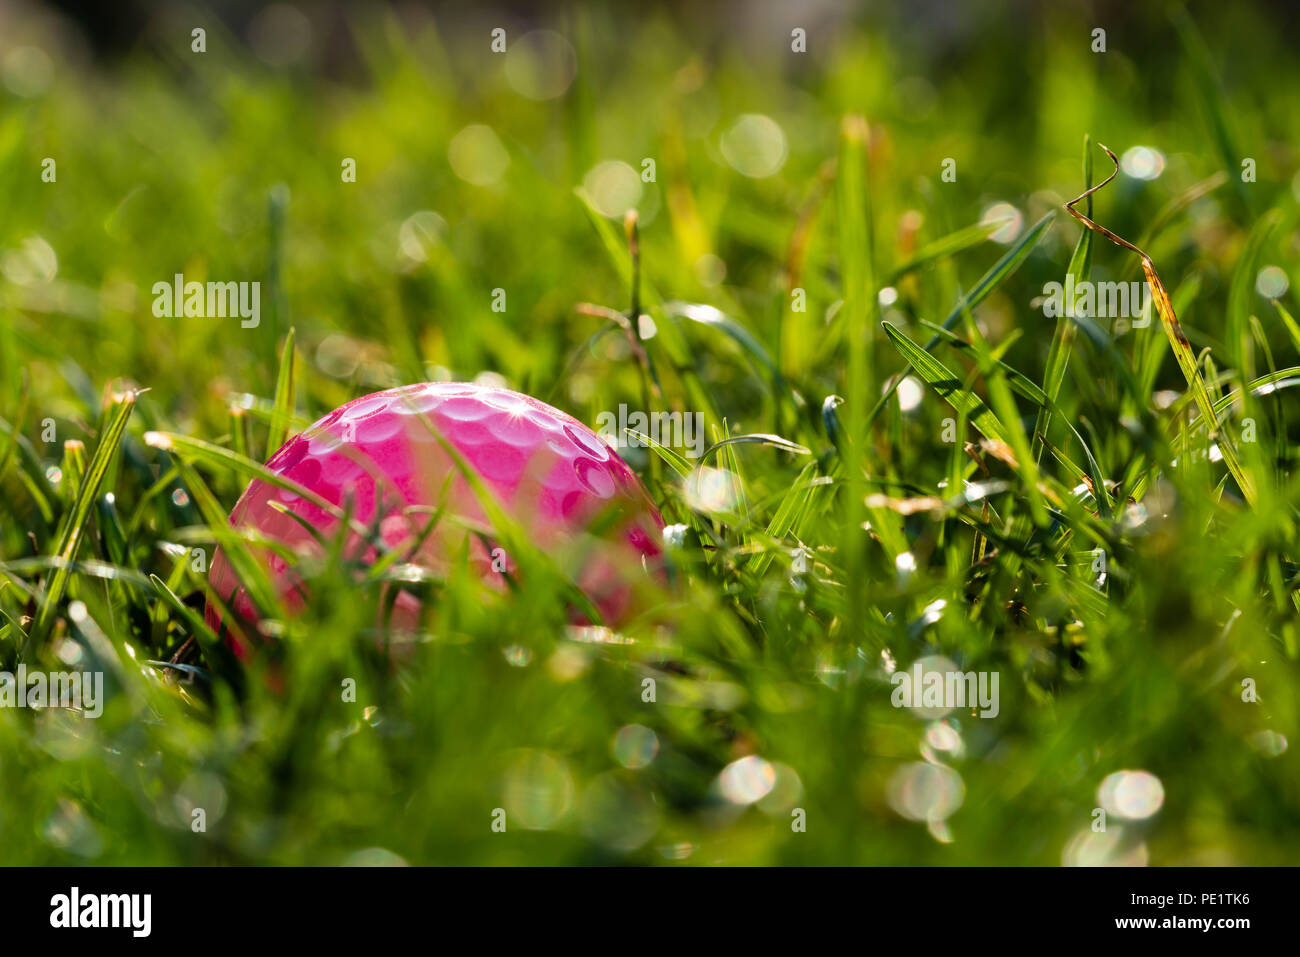 A pink golf ball on a meadow. Stock Photo